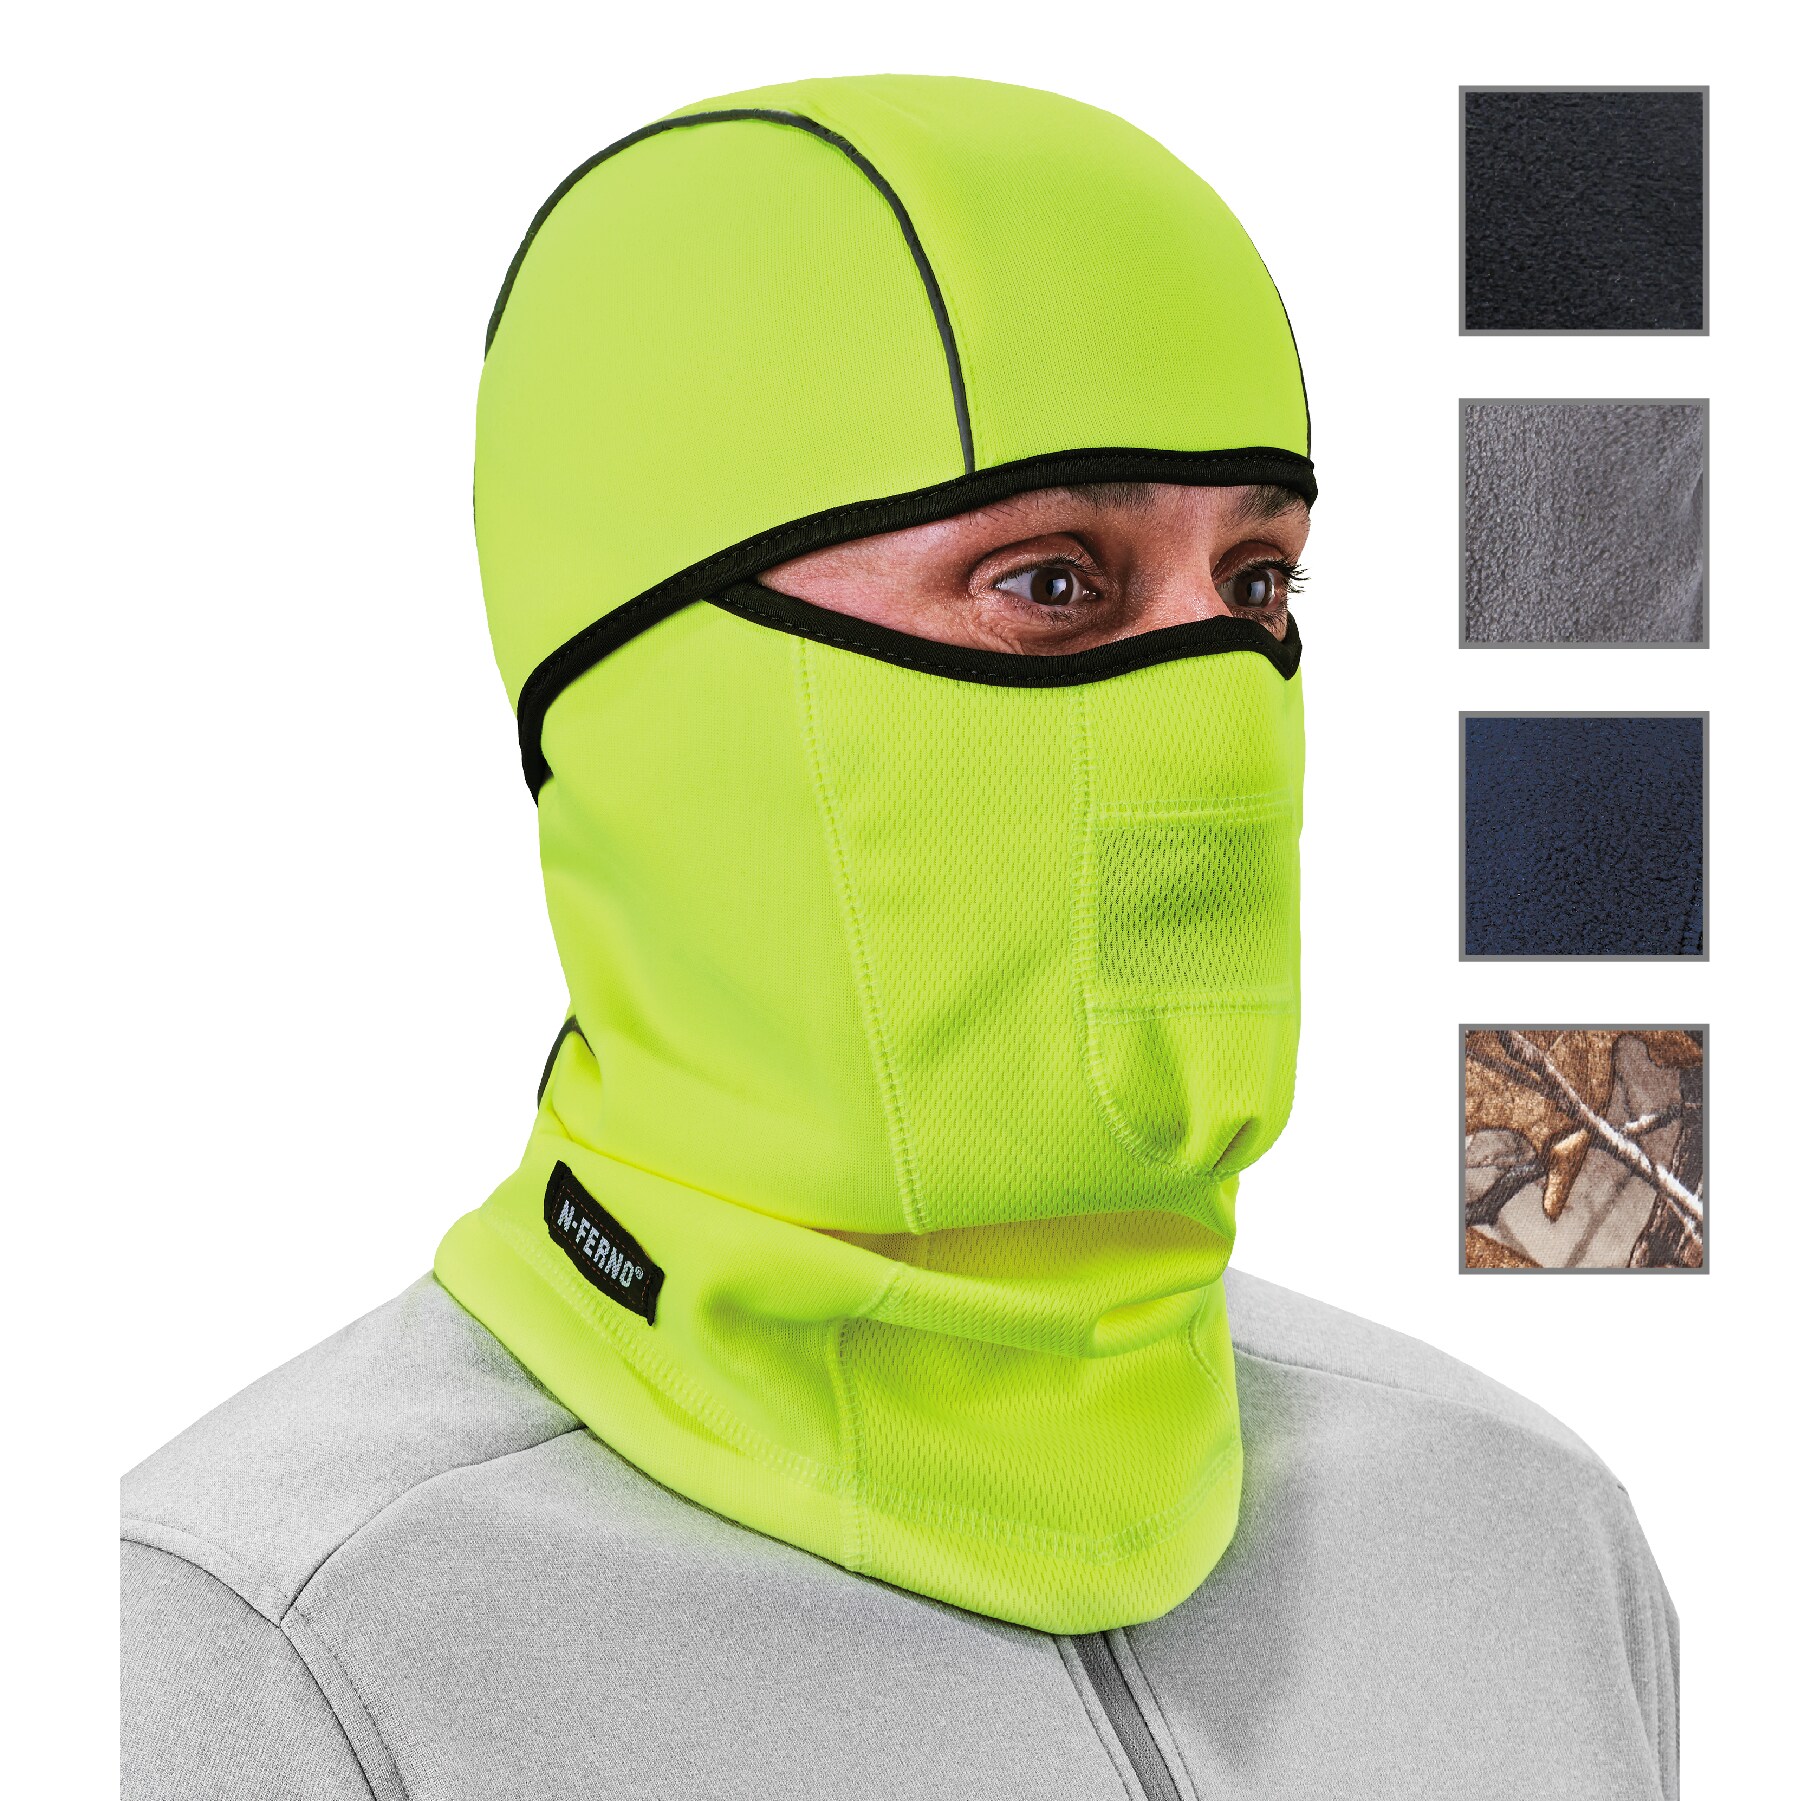 N-Ferno Lime Wind-resistant Hinged Balaclava Face Mask - One Size Fits Most  - Green - Work & Cold Weather Hat in the Hats department at